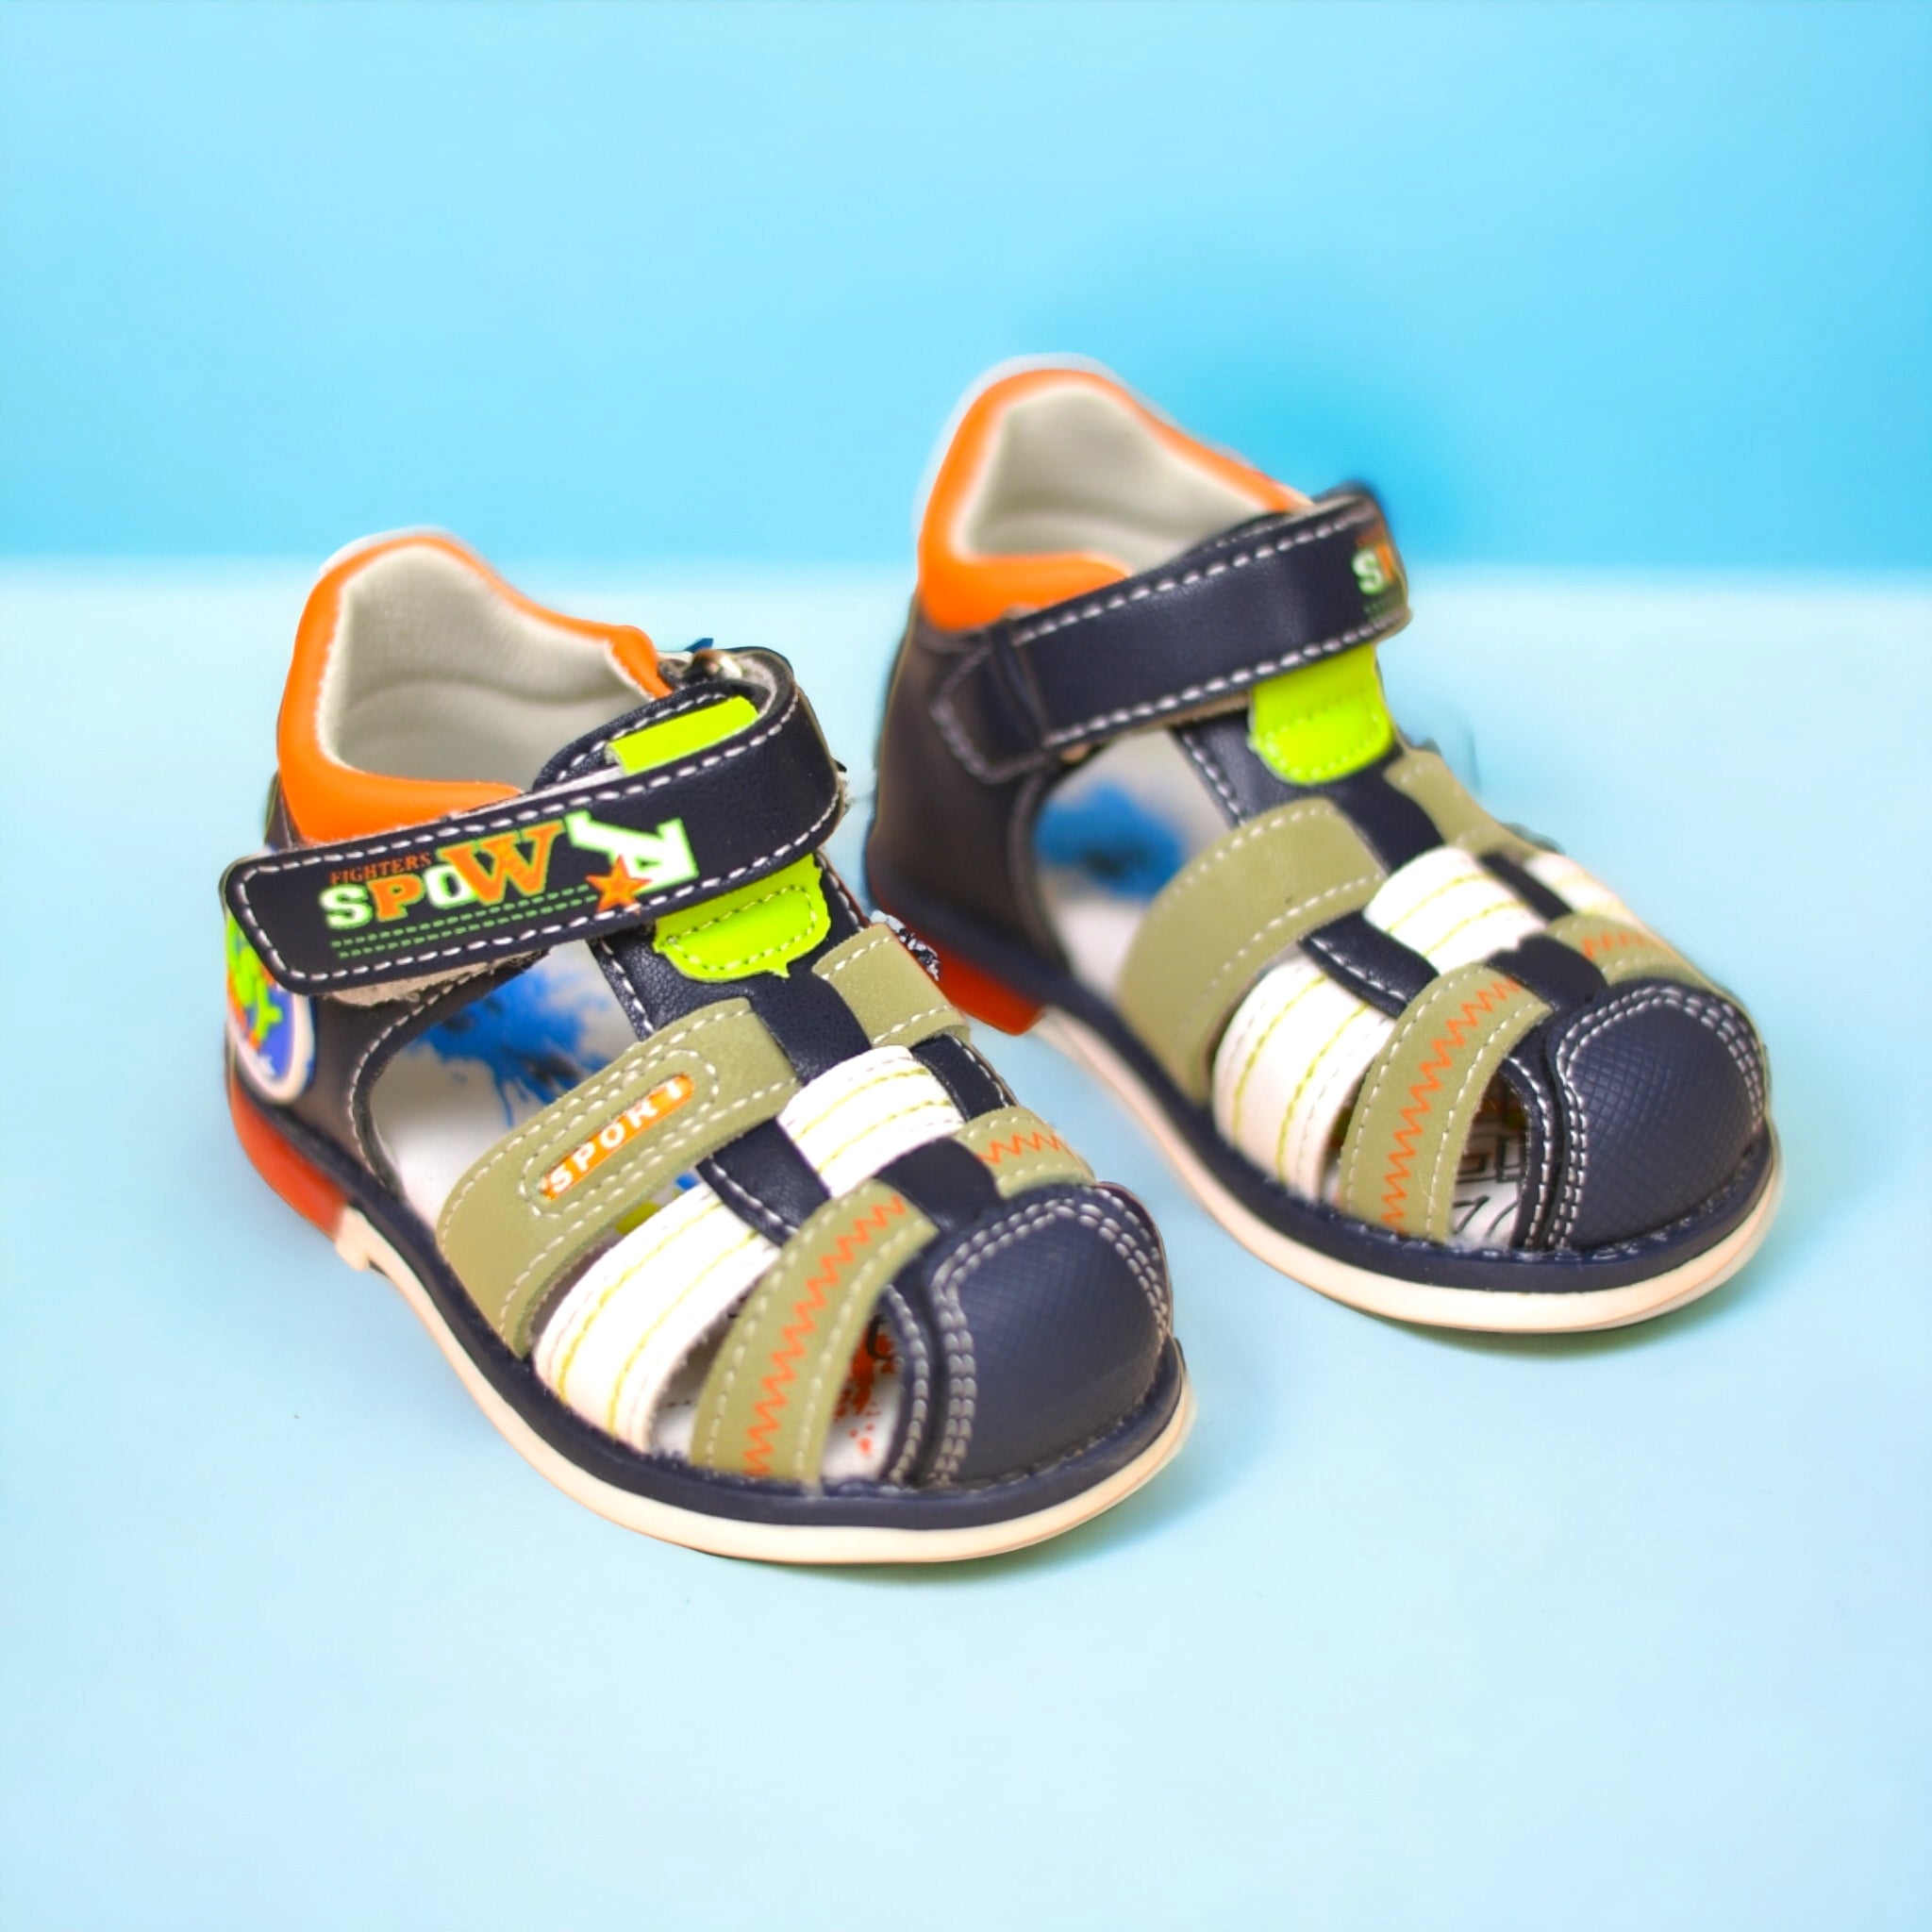 Kids Sandals Aqua Blue Made Of Eco Leather And Natural Leather